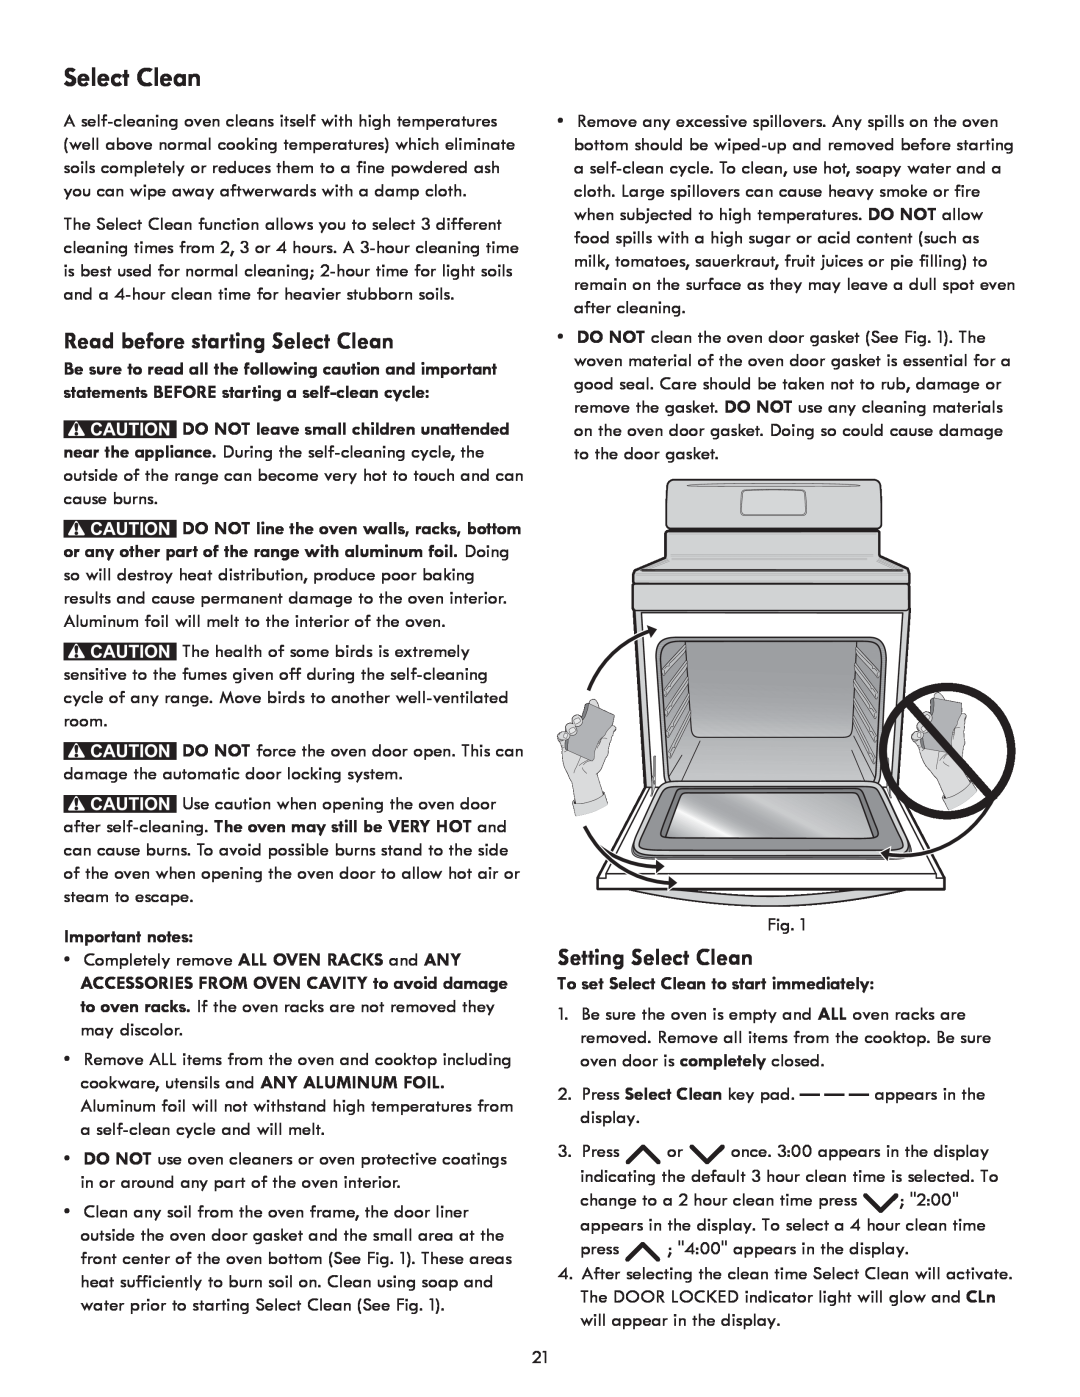 Kenmore 790.922 Read before starting Select Clean, Setting Select Clean, To set Select Clean to start immediately 